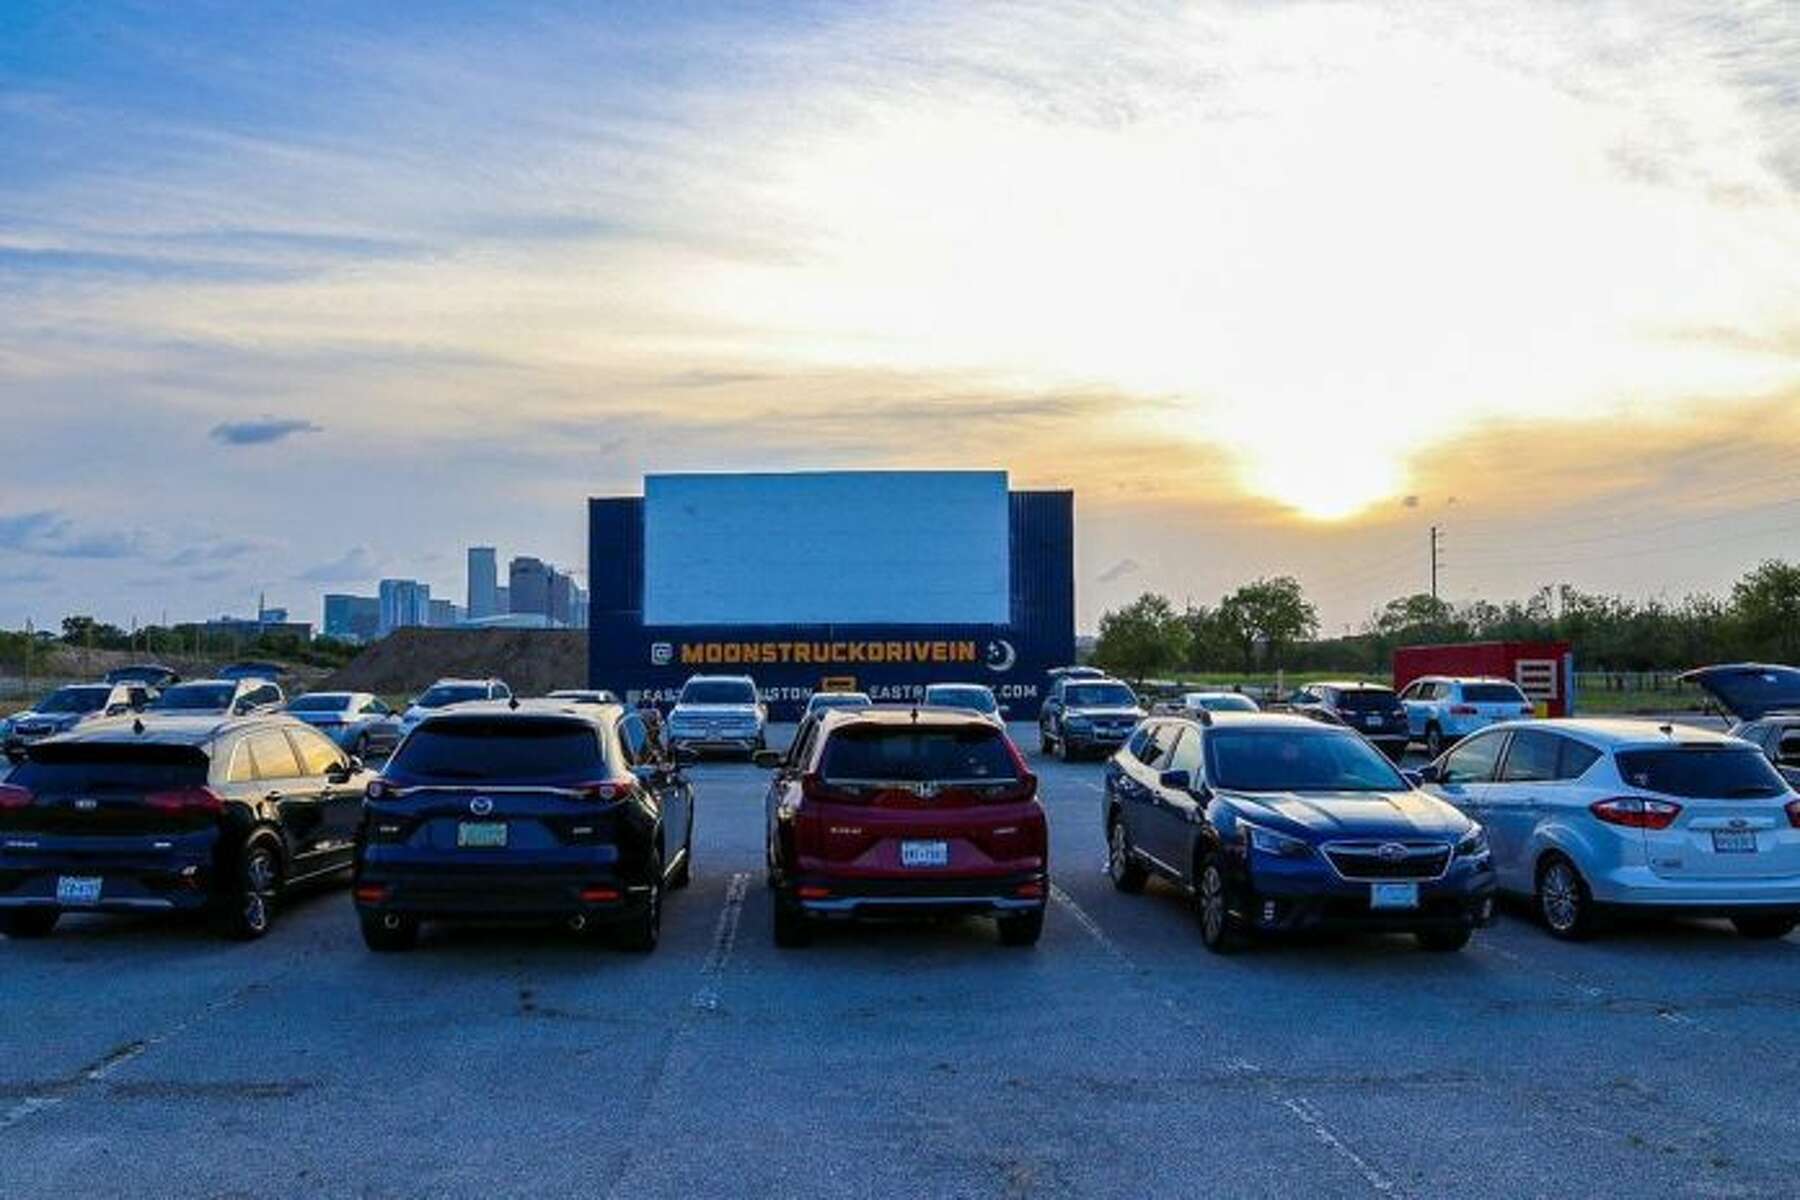 south haven movie theater times